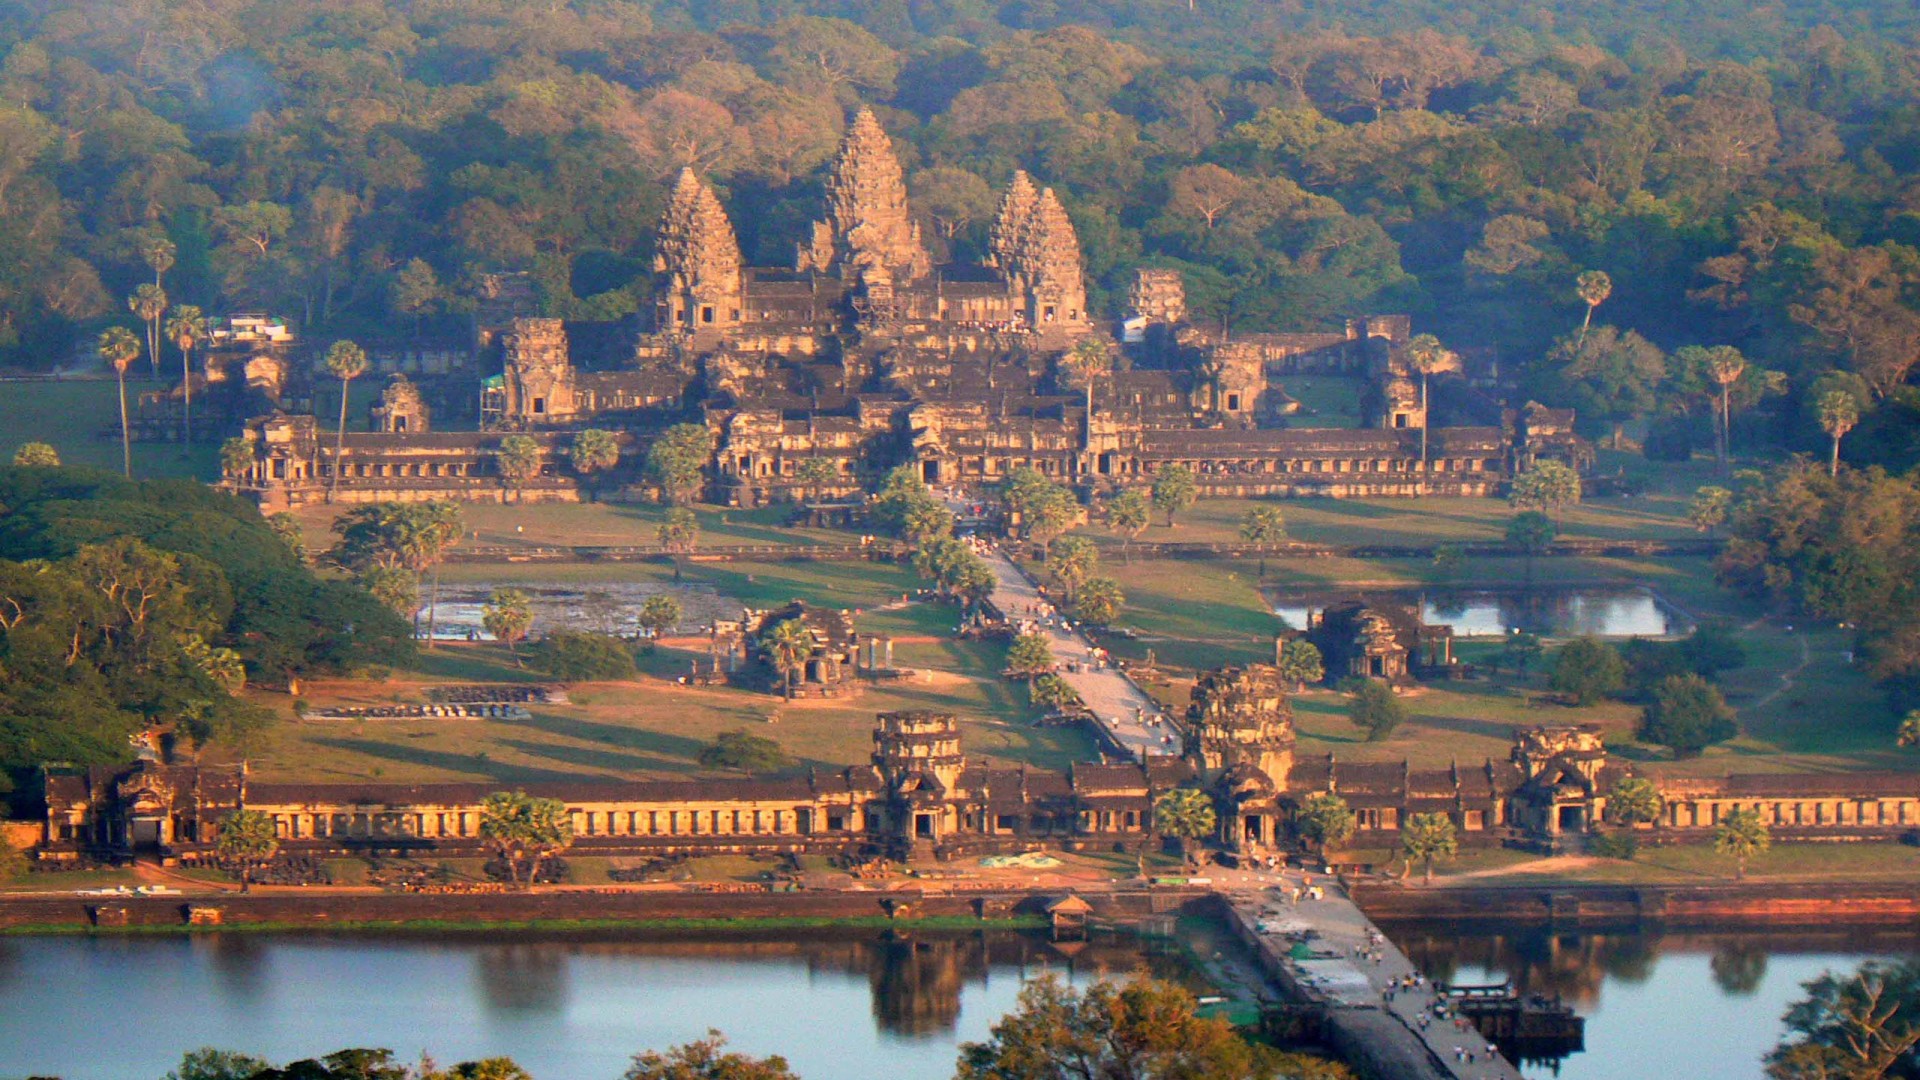 The PAWC will take a virtual journey to Angkor Wat at the January luncheon.